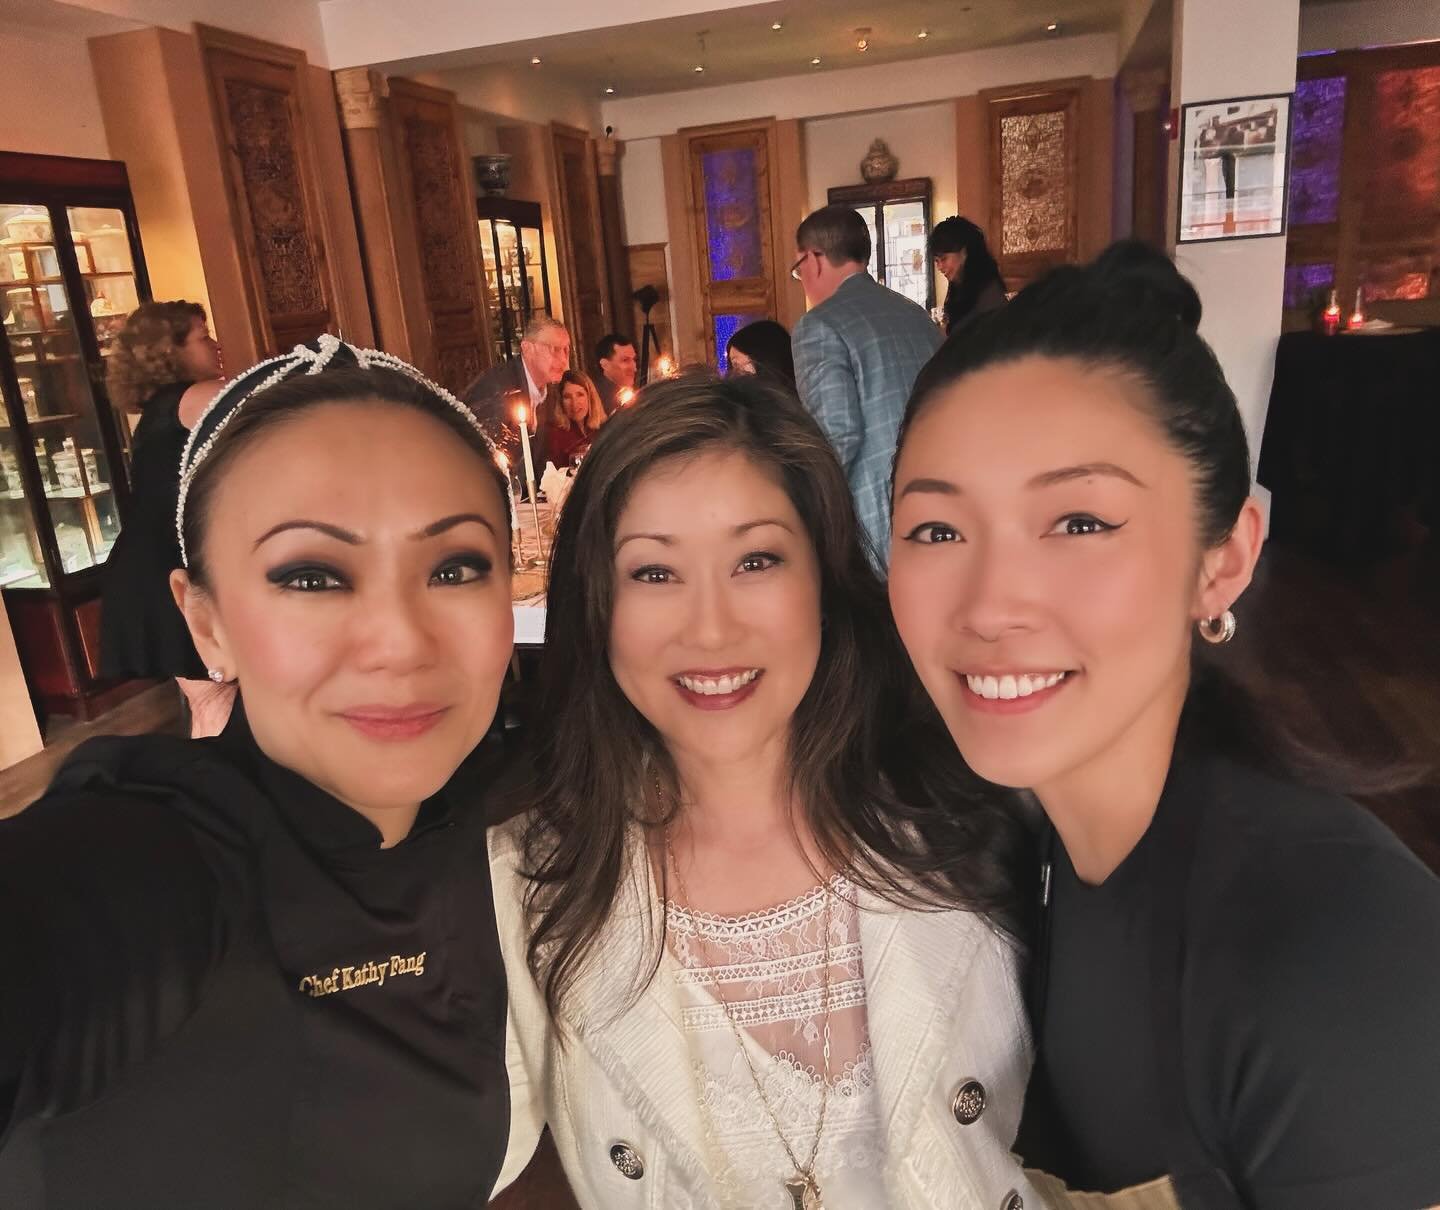 Last night&rsquo;s special dinner for Kristi Yamaguchi&rsquo;s @alwaysdream at @fangrestaurantsf - @kristanakamura x @chefkathyfang collaborated on a menu centered around Asian food and our love for cuisines around the Mediterranean Sea. #chefstable 